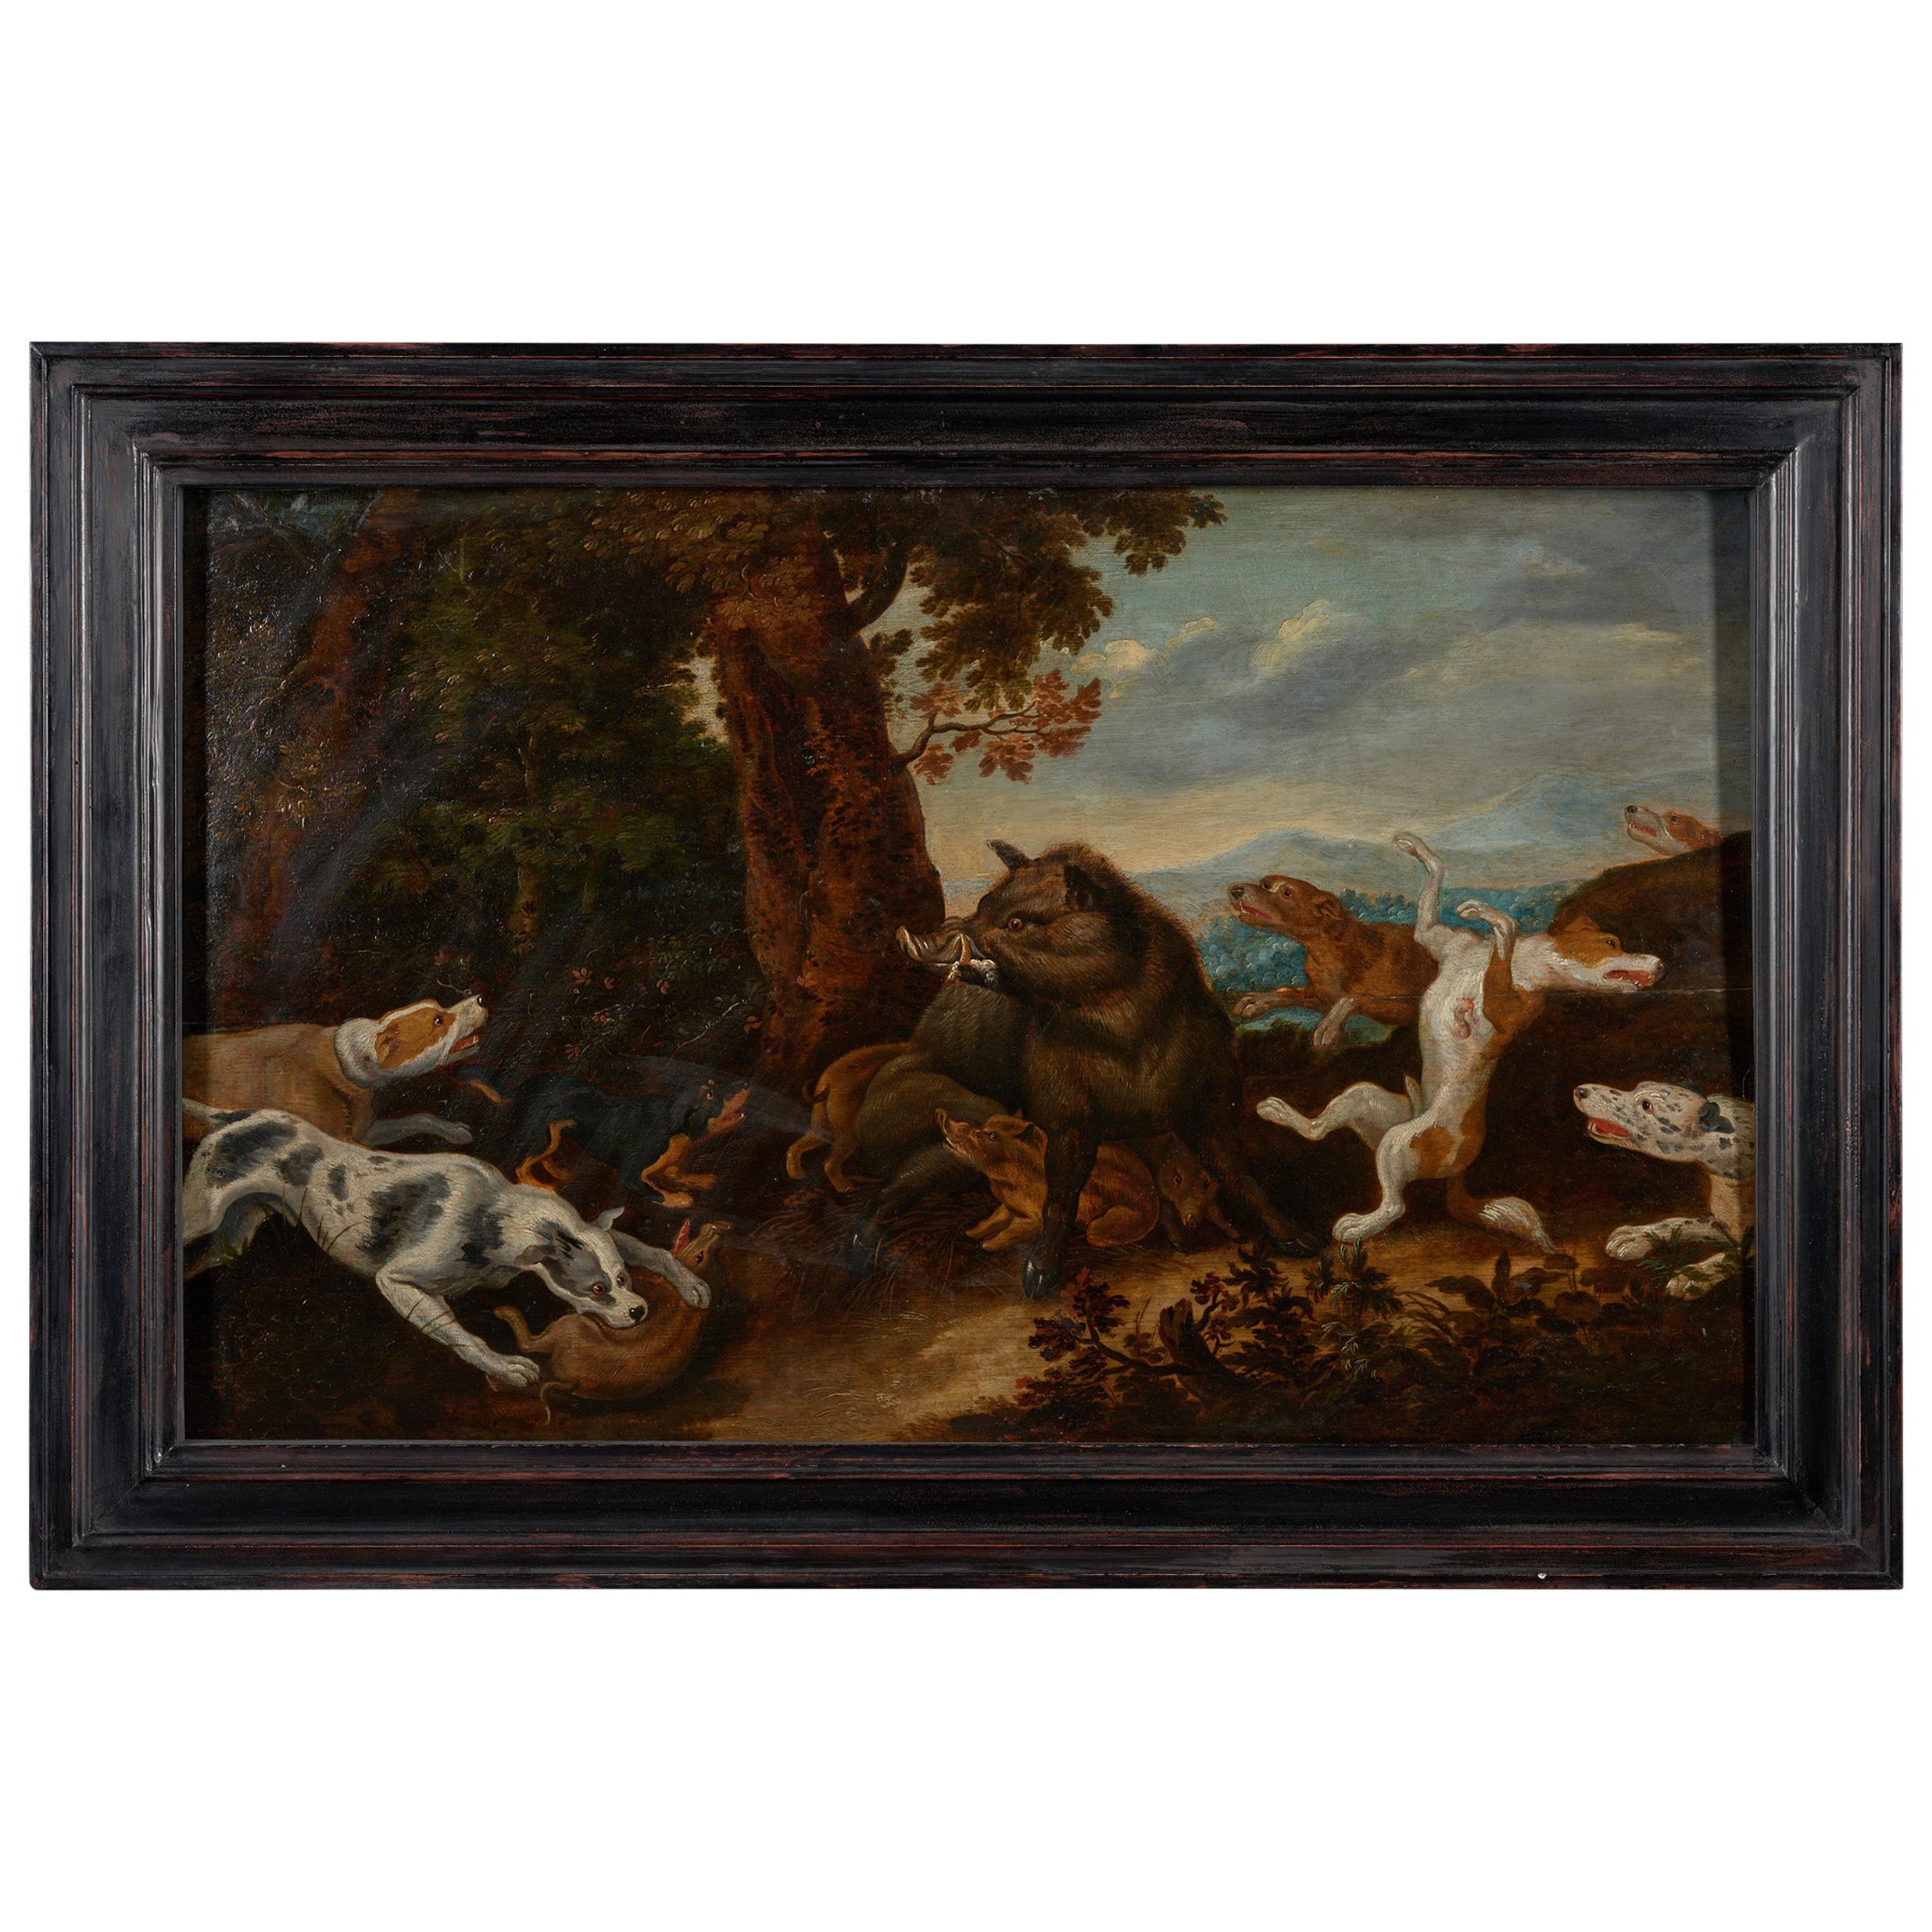 17th Century Flemish School, Wild Boar Hunt in the Style of Frans Snijders